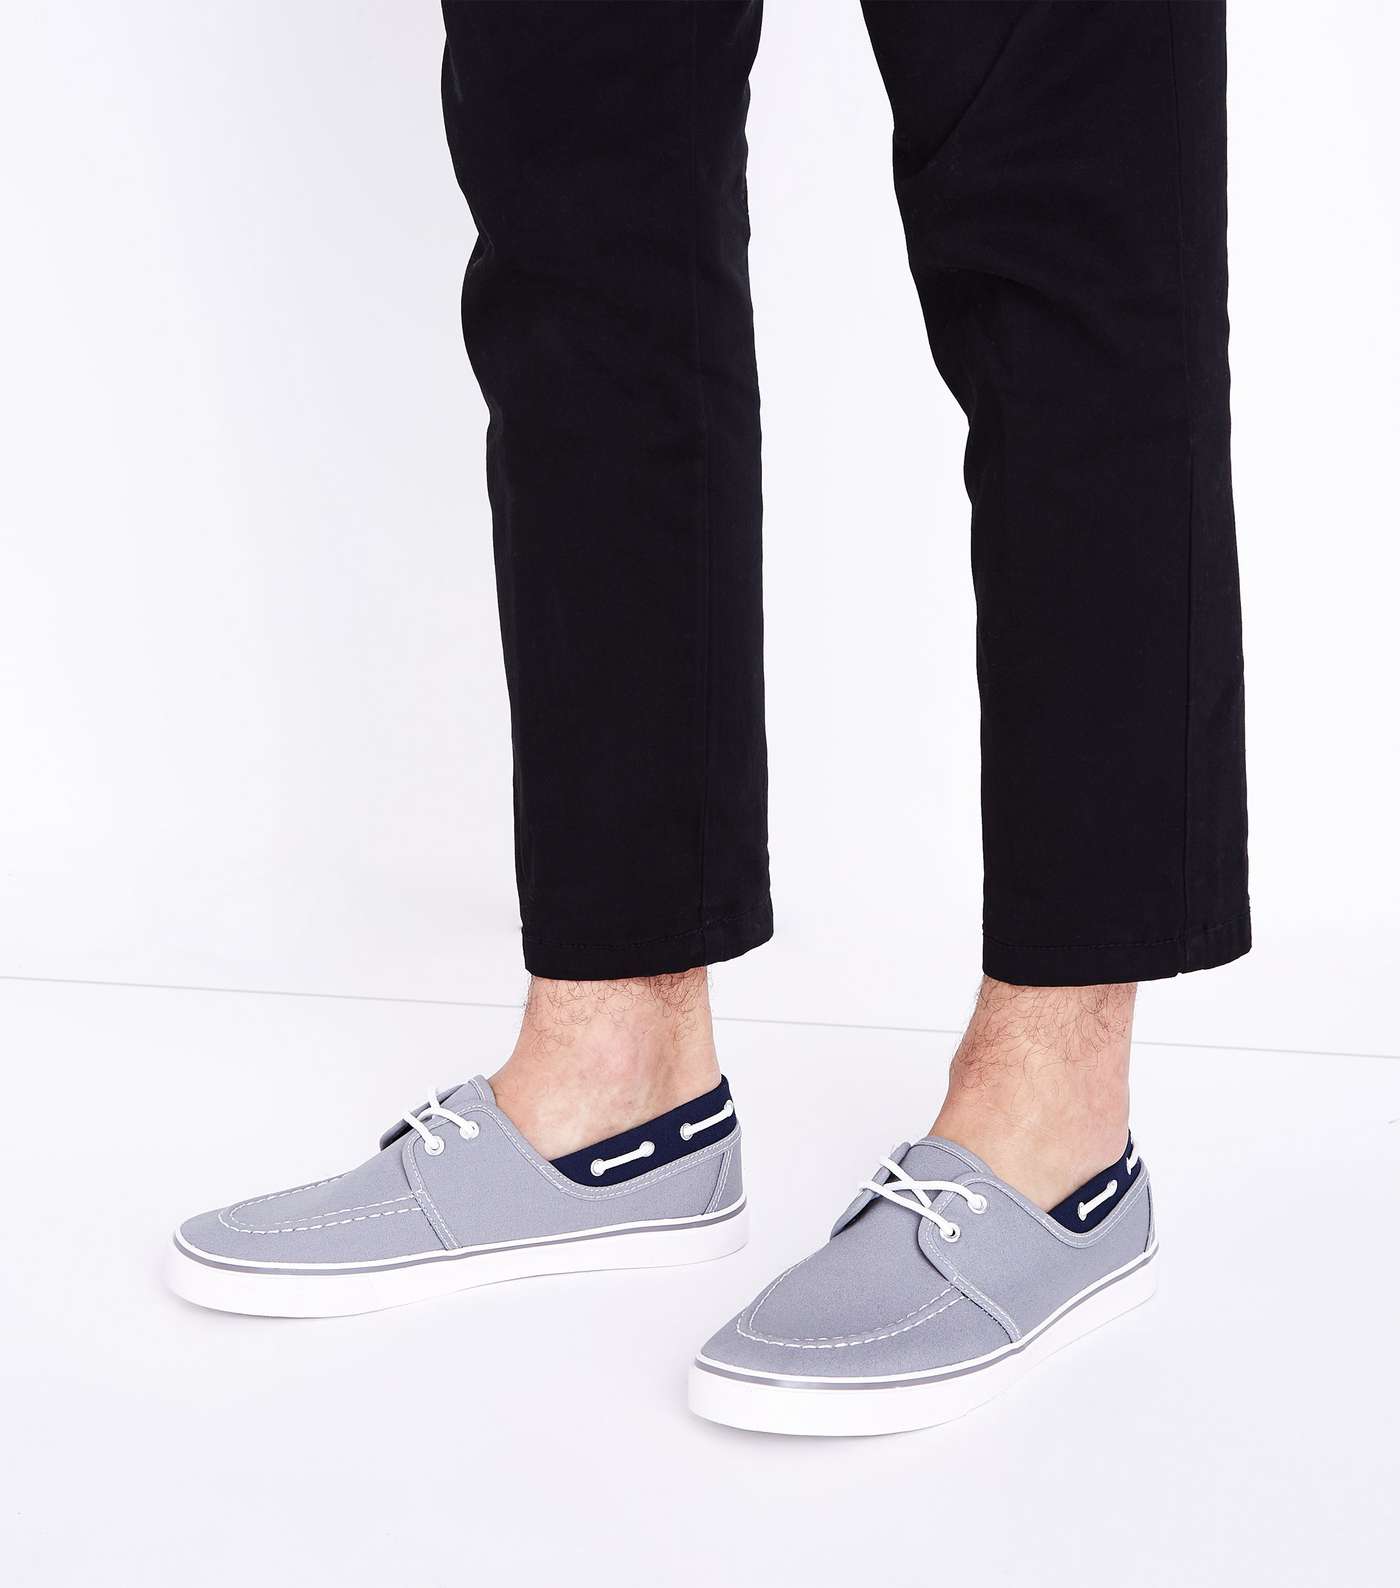 Grey Lace Up Canvas Boat Shoes Image 2